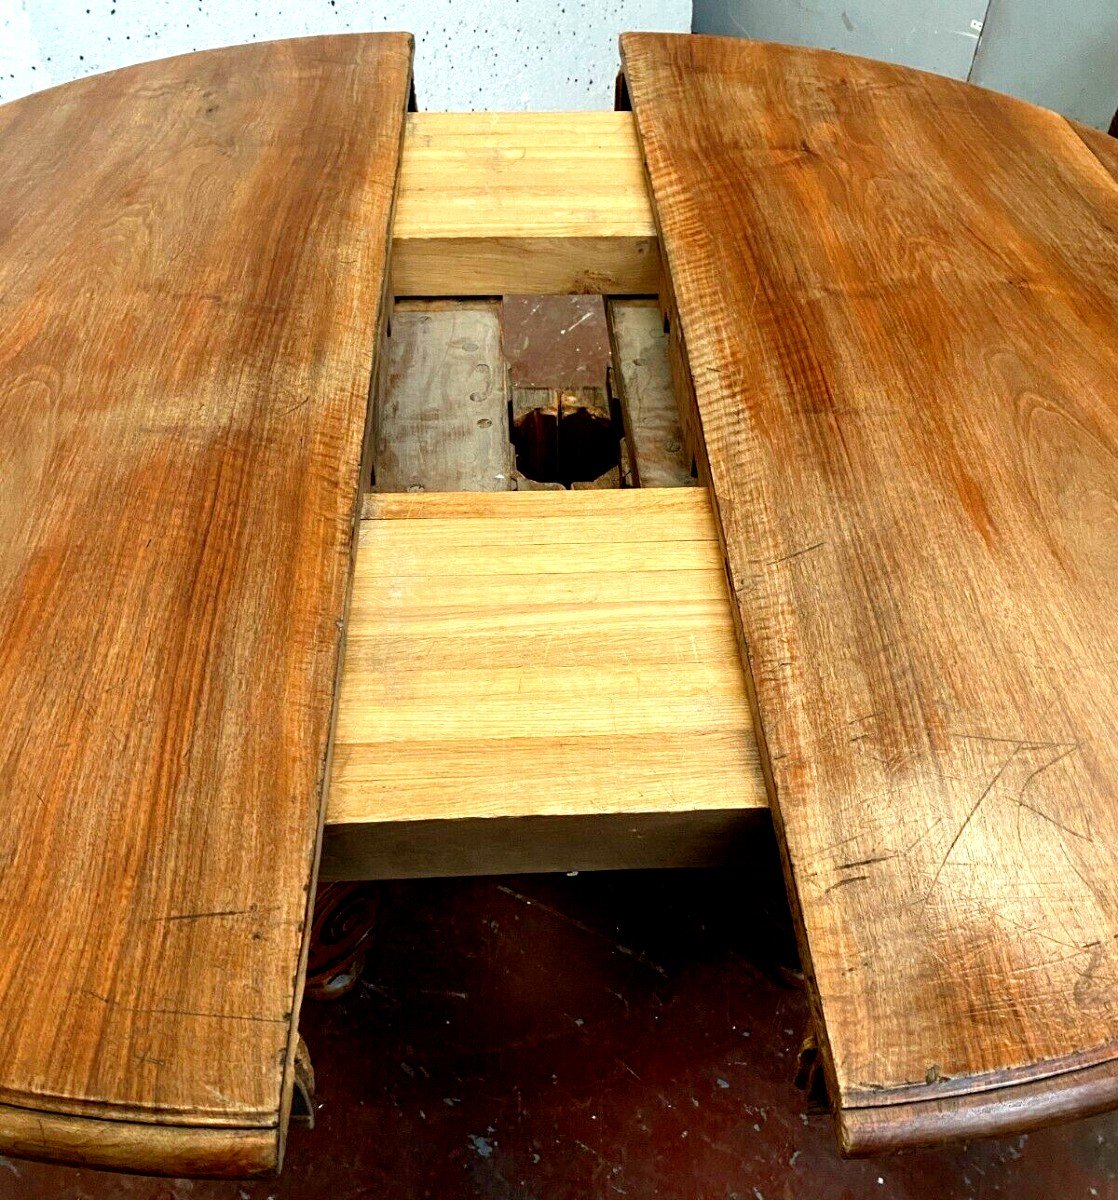 Large Napoleon III Table With Central Base In Solid Walnut XIX Century-photo-4